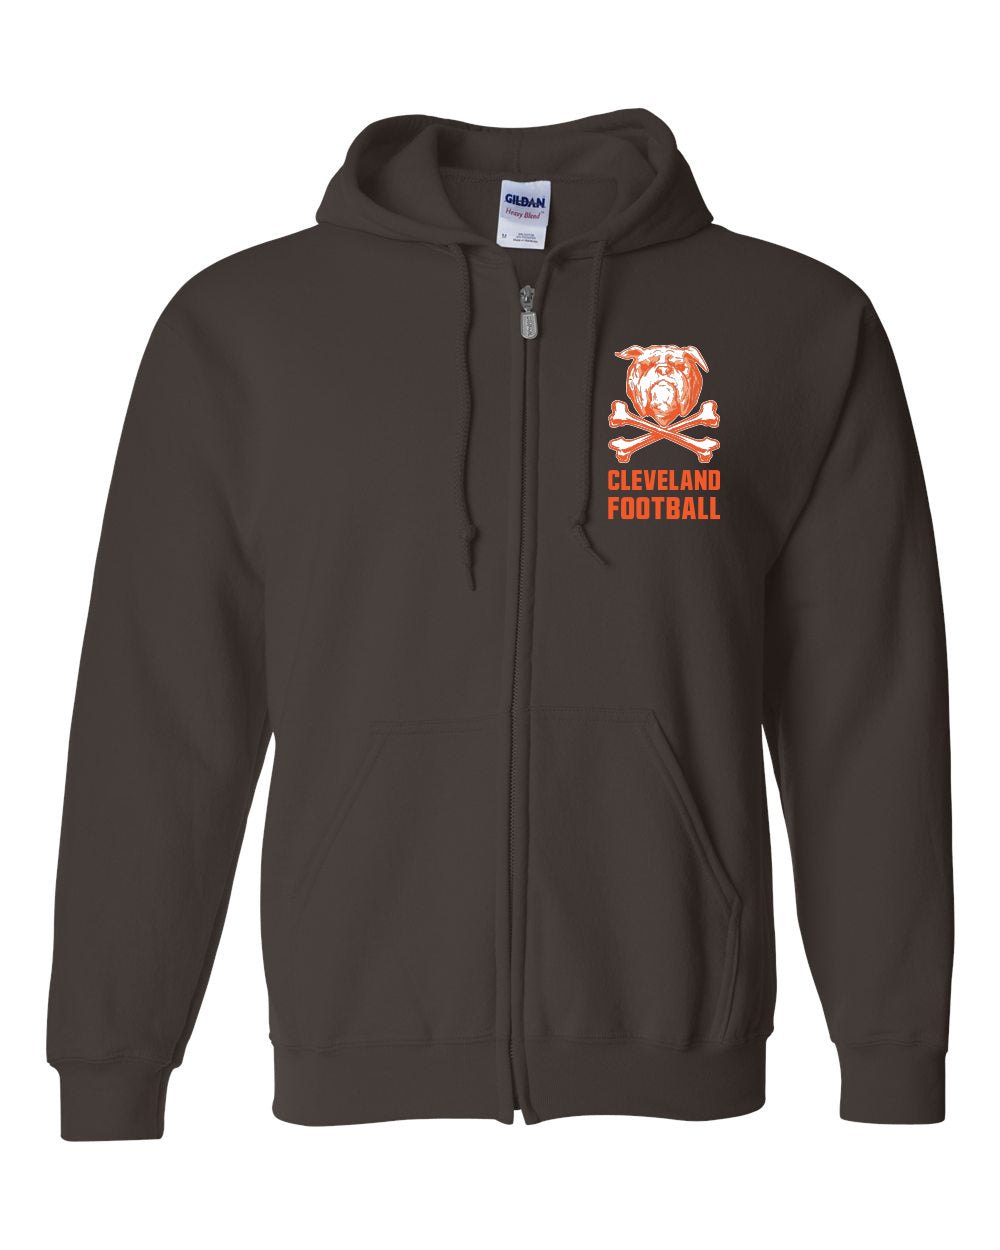 Cleveland Football Beware of the Dawgs Zip-Up Hoodie